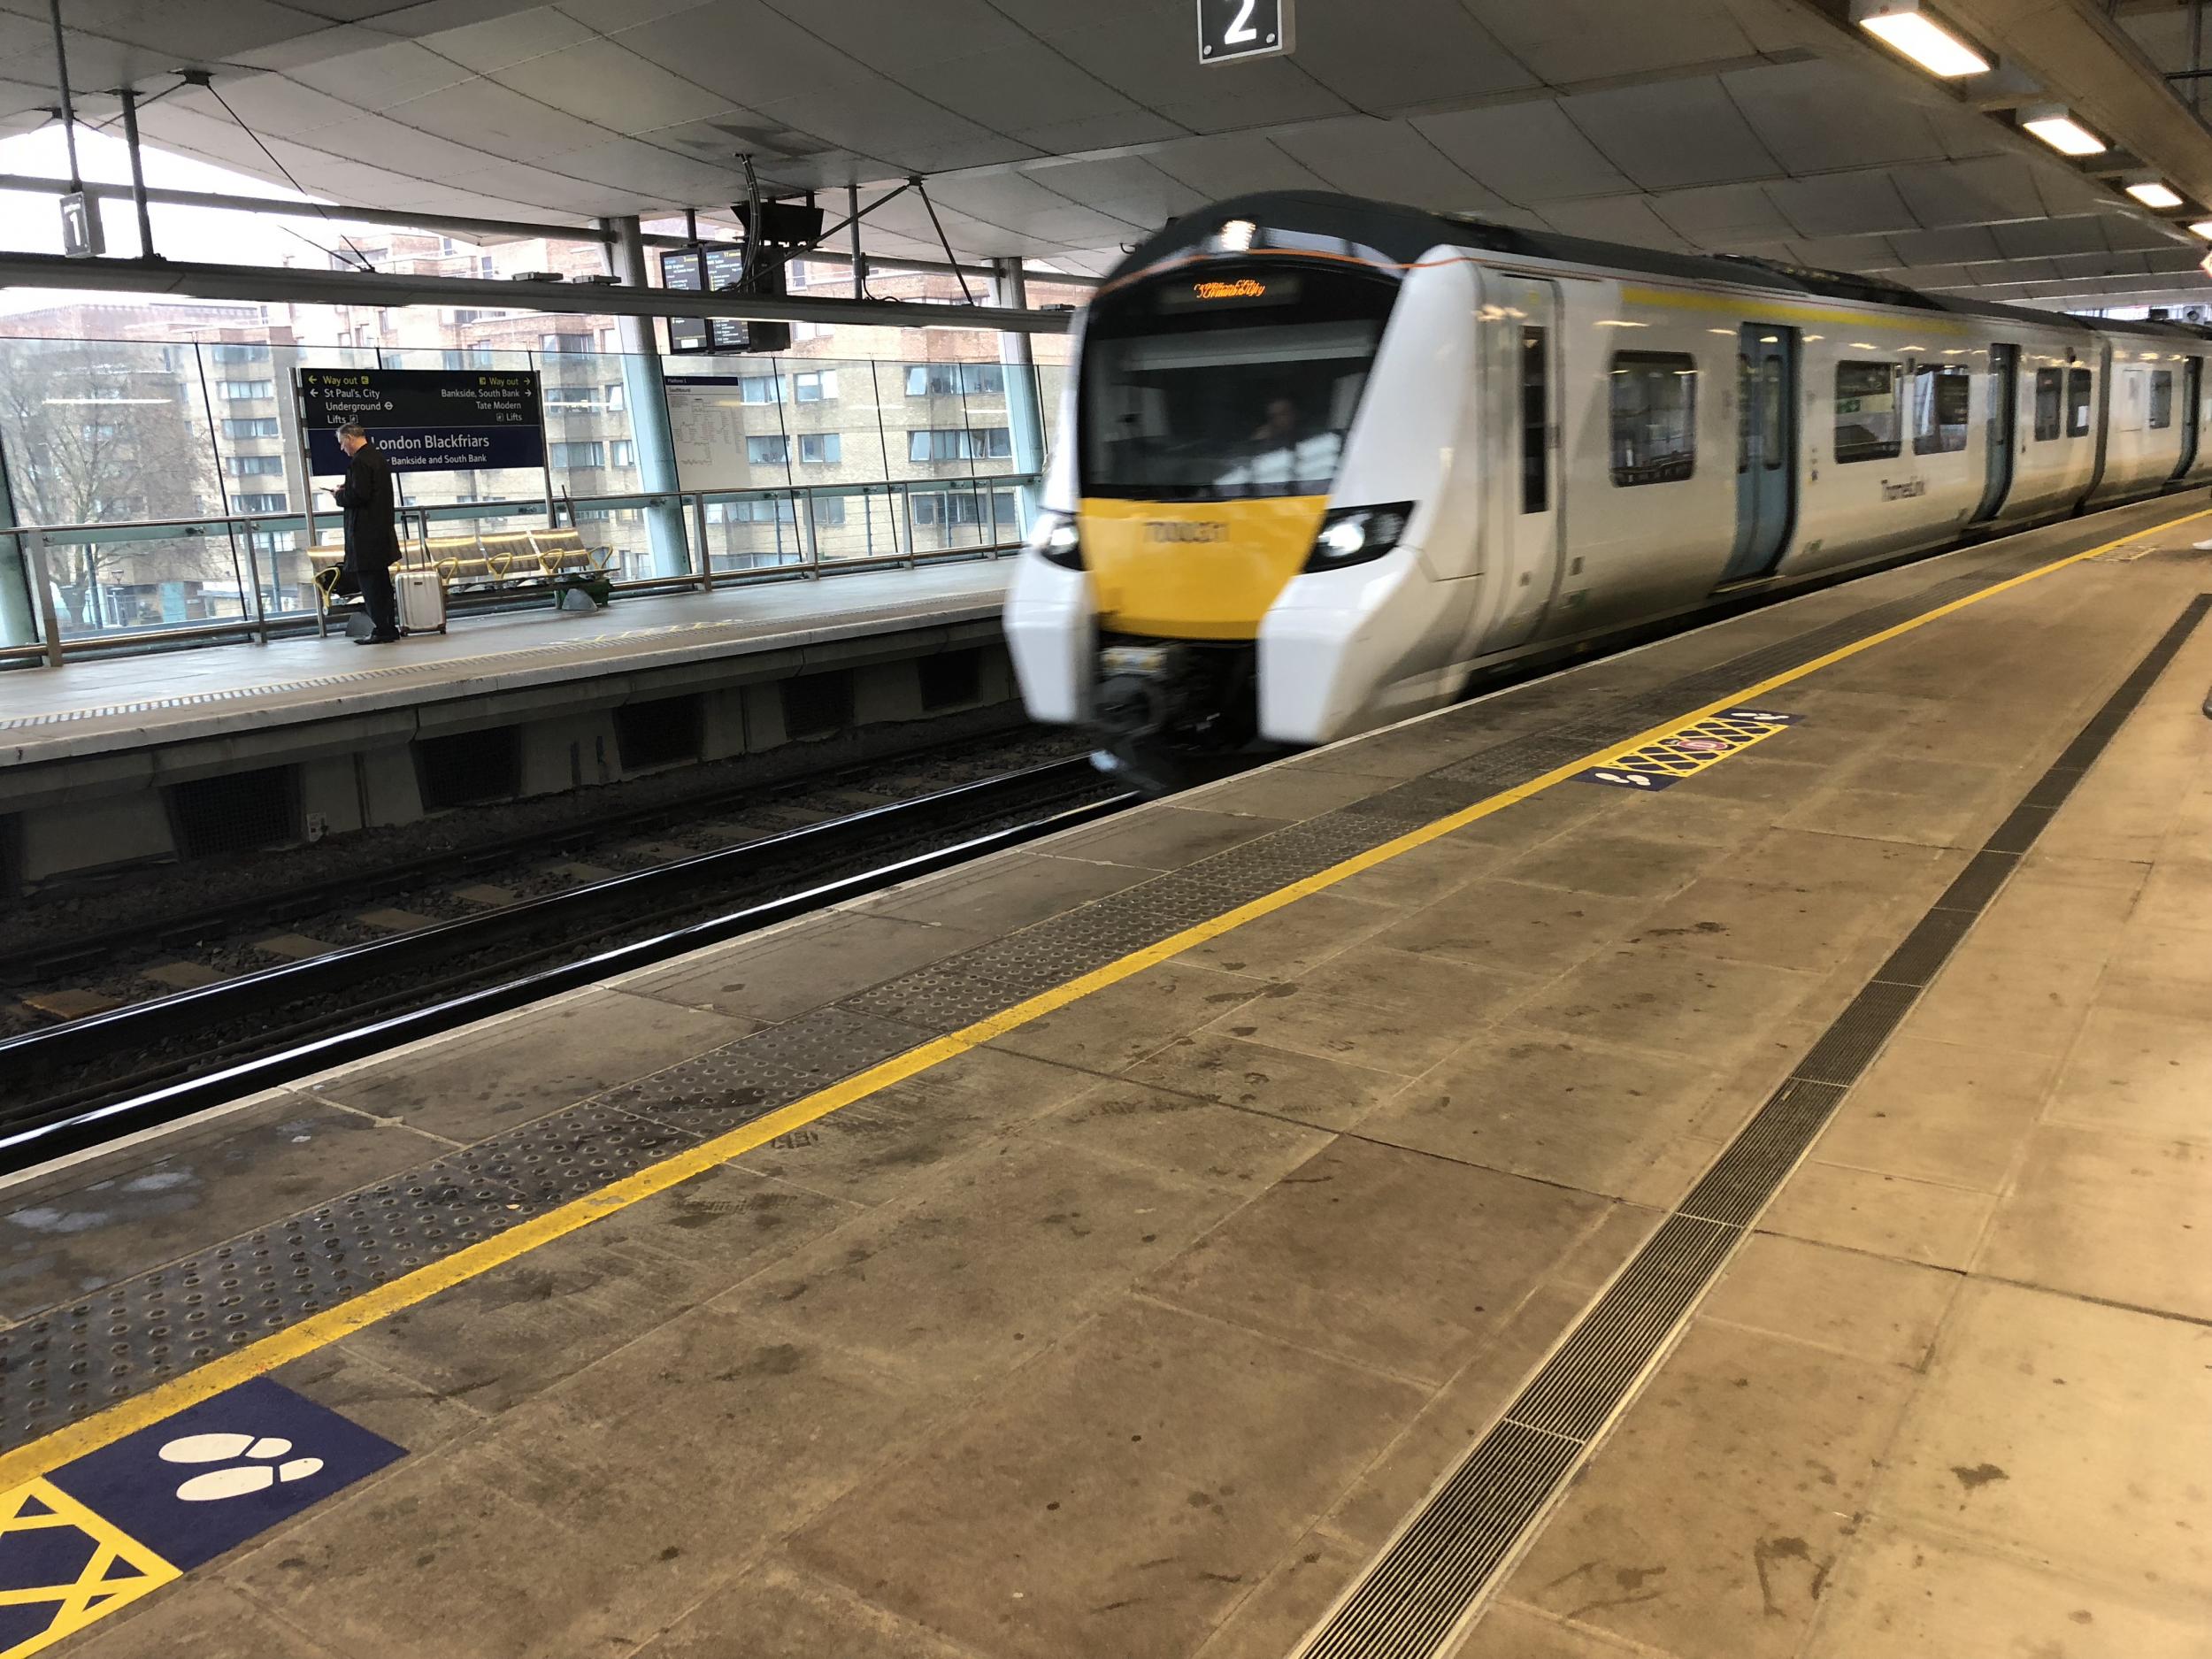 Mind the gap: Rail staff will be on hand to enforce 2m separation